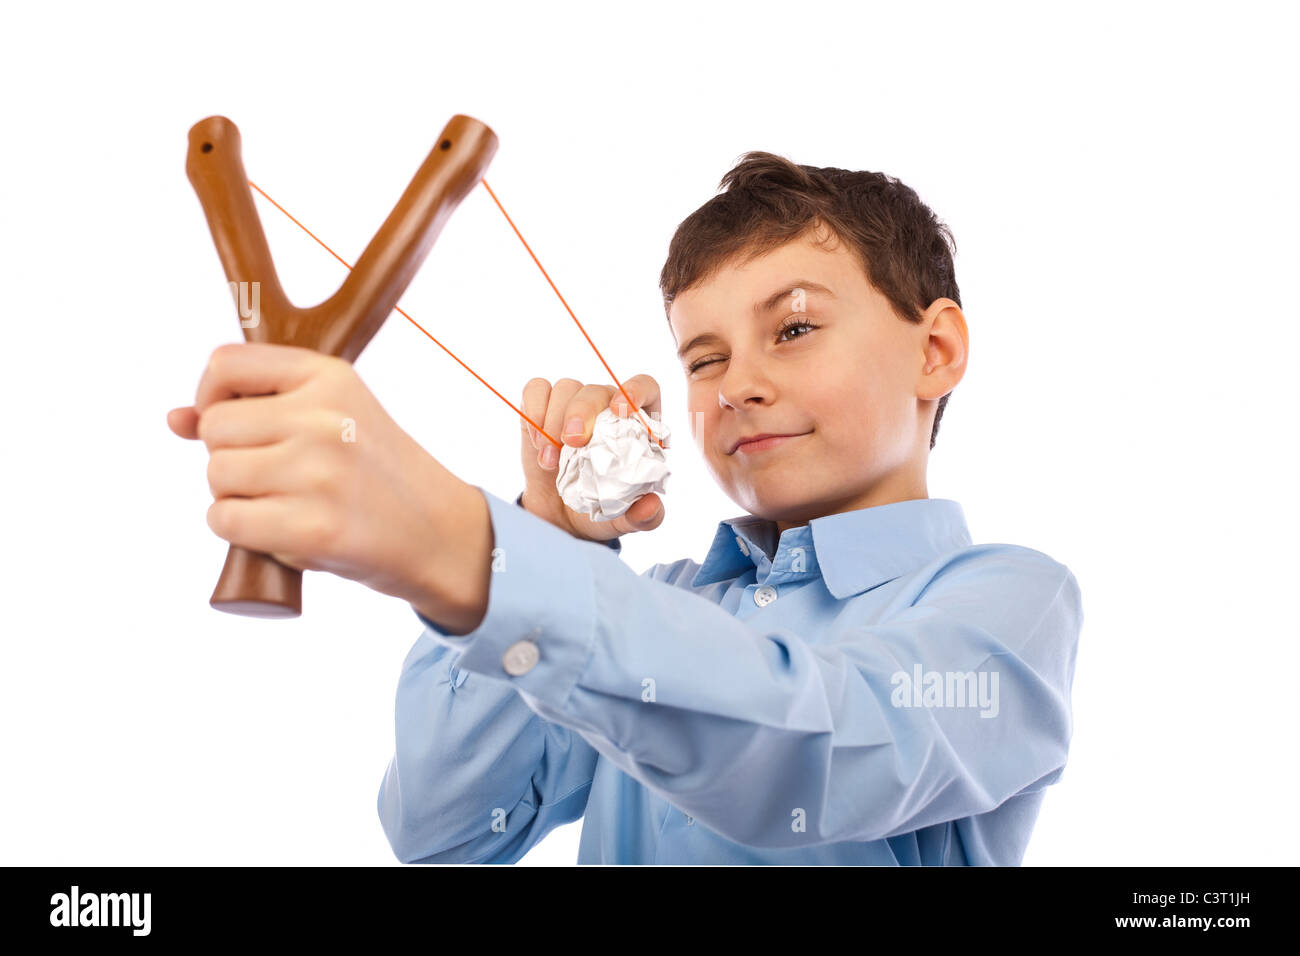 Portrait of a schoolboy sending notes or messages with slingshot and a piece of crumpled paper Stock Photo